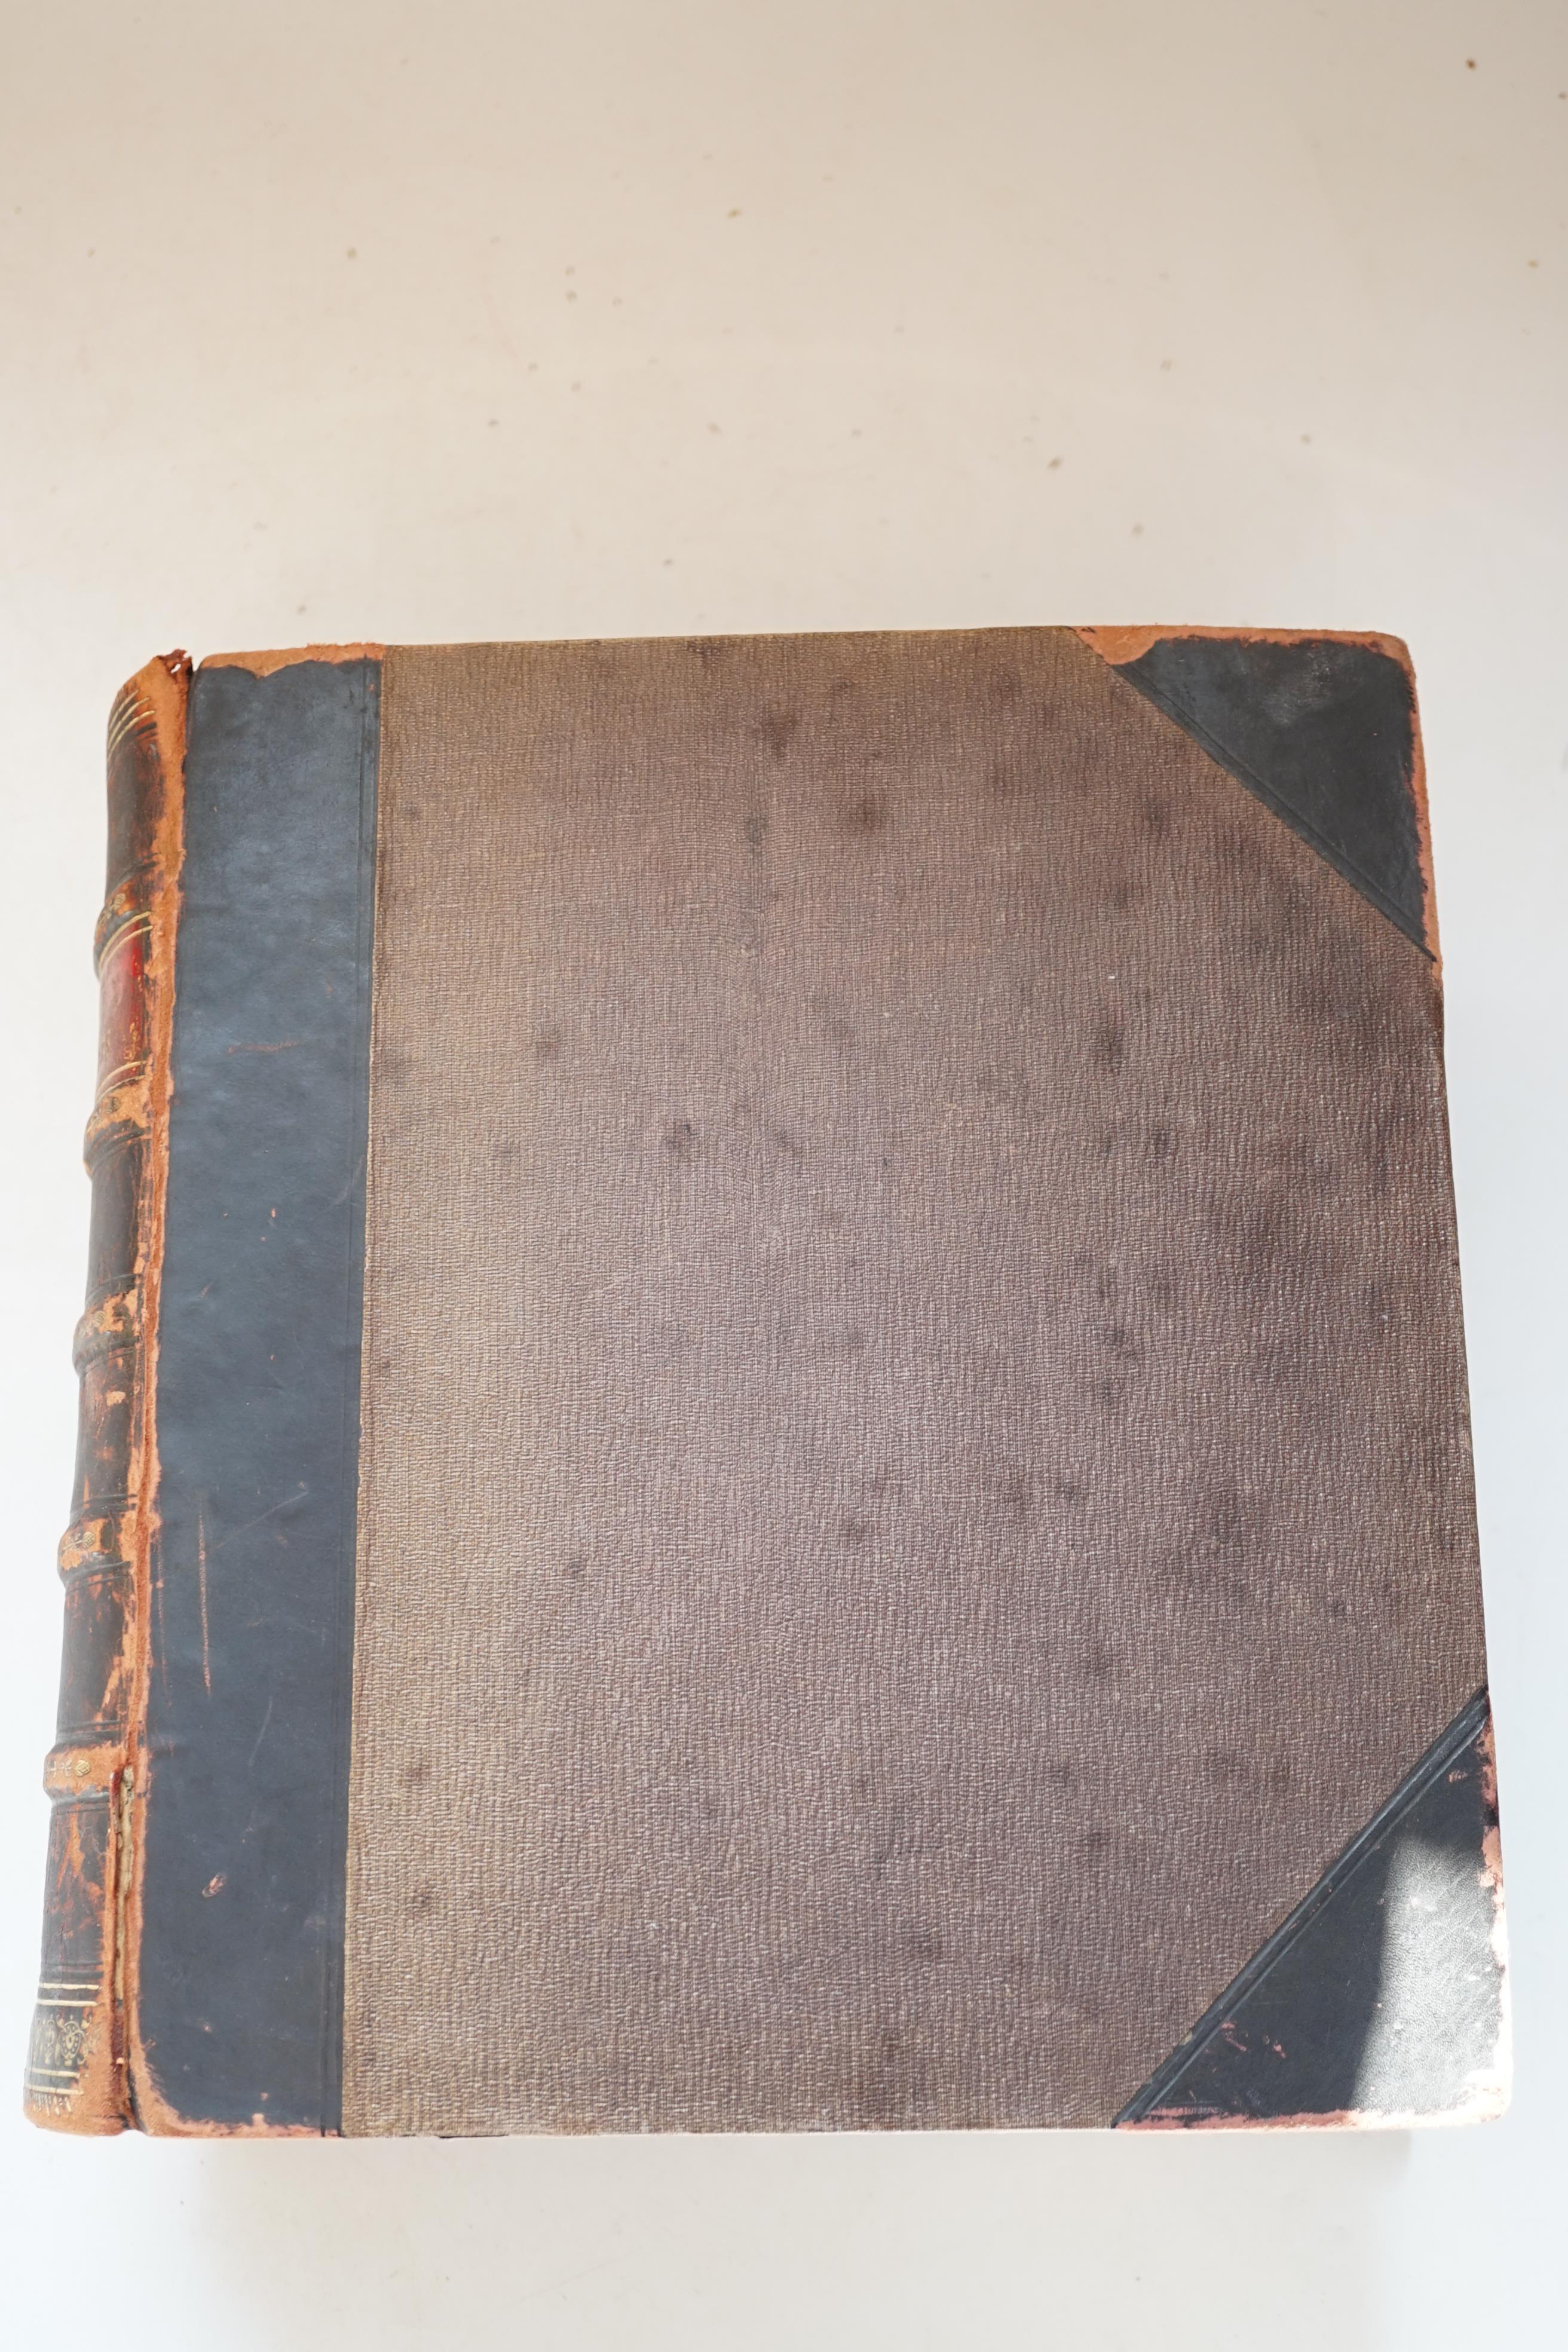 The Book of Martyrs, or, Christian Martyrology…including every important relation in Fox’s Book of Martyrs…, 2 vols in 1, 20 engraved plates, repairs and some loss to pp. 13-16half red morocco, printed by J. Nuttall, Liv